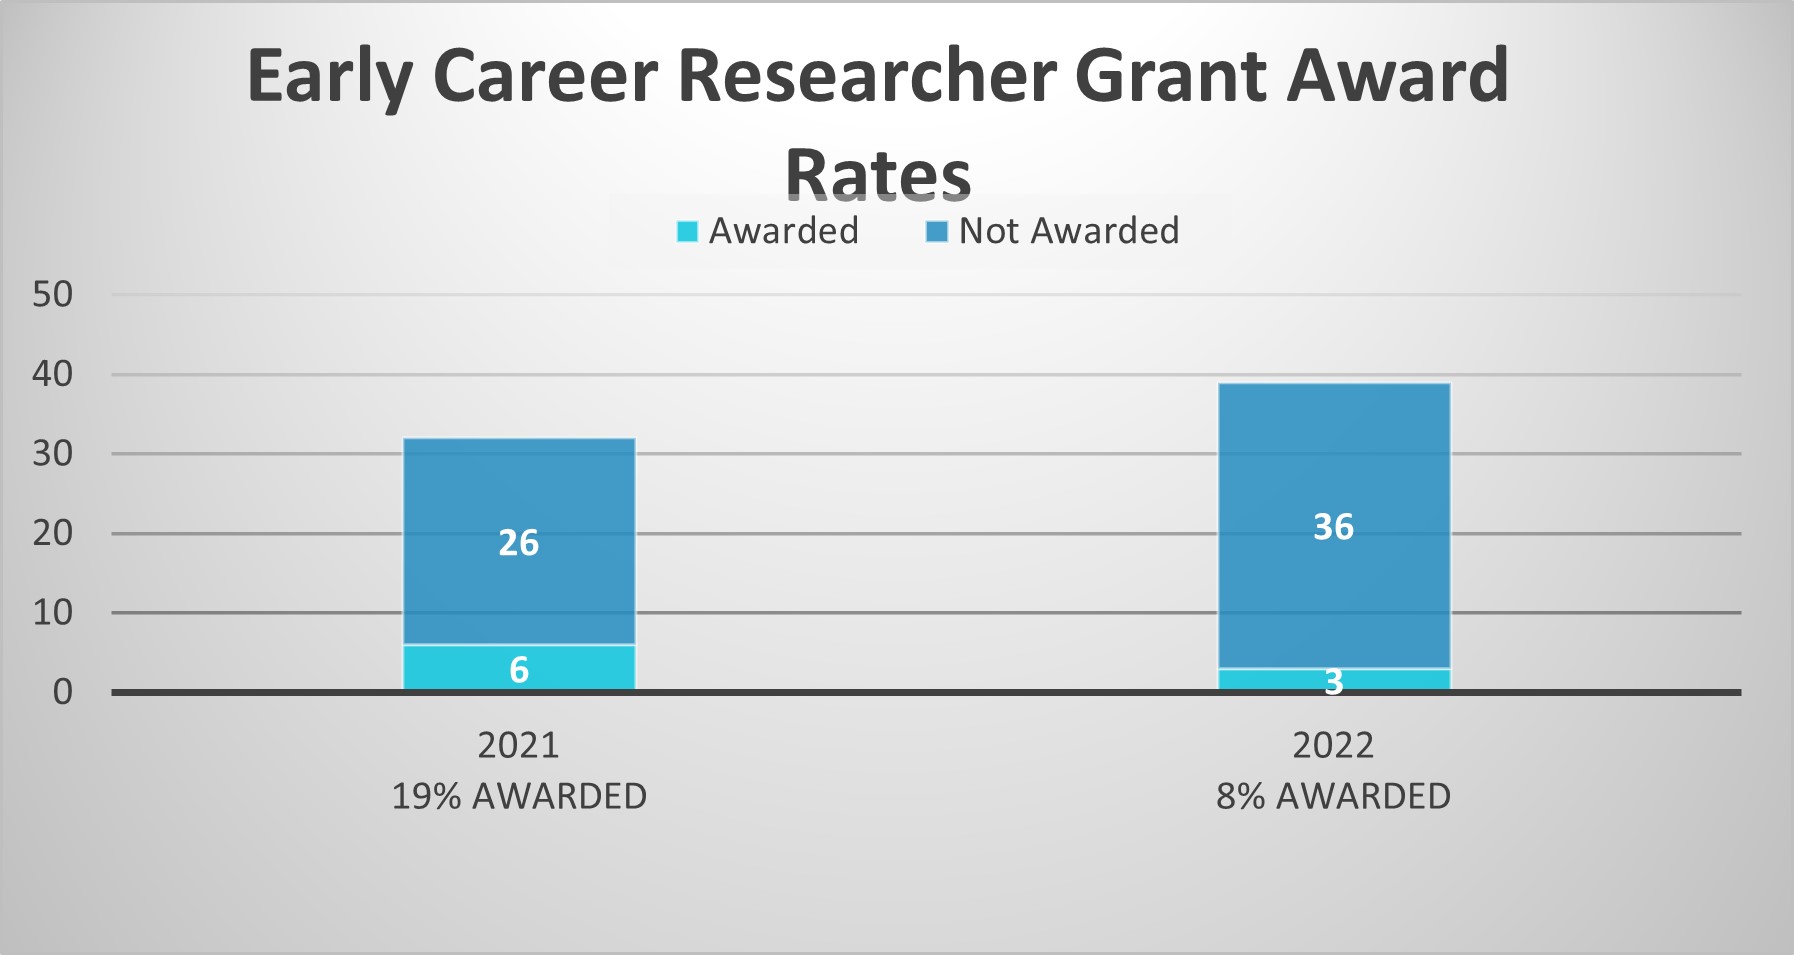 Charts showing how the application and award rates varied from 2021 to 2022 for Early Career Researcher Grants